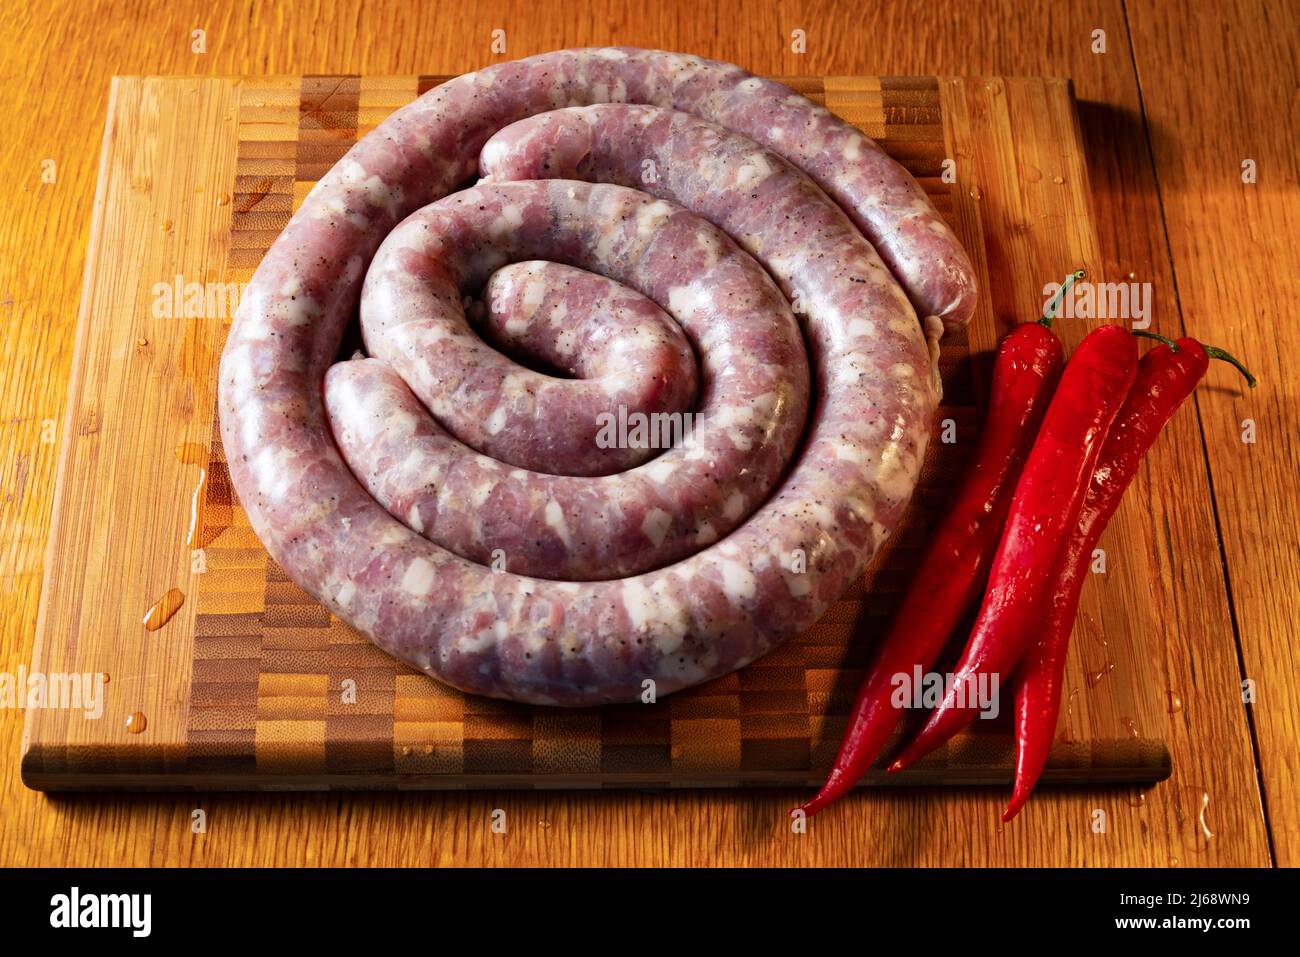 Raw sausages on a cutting board with red pepper Stock Photo